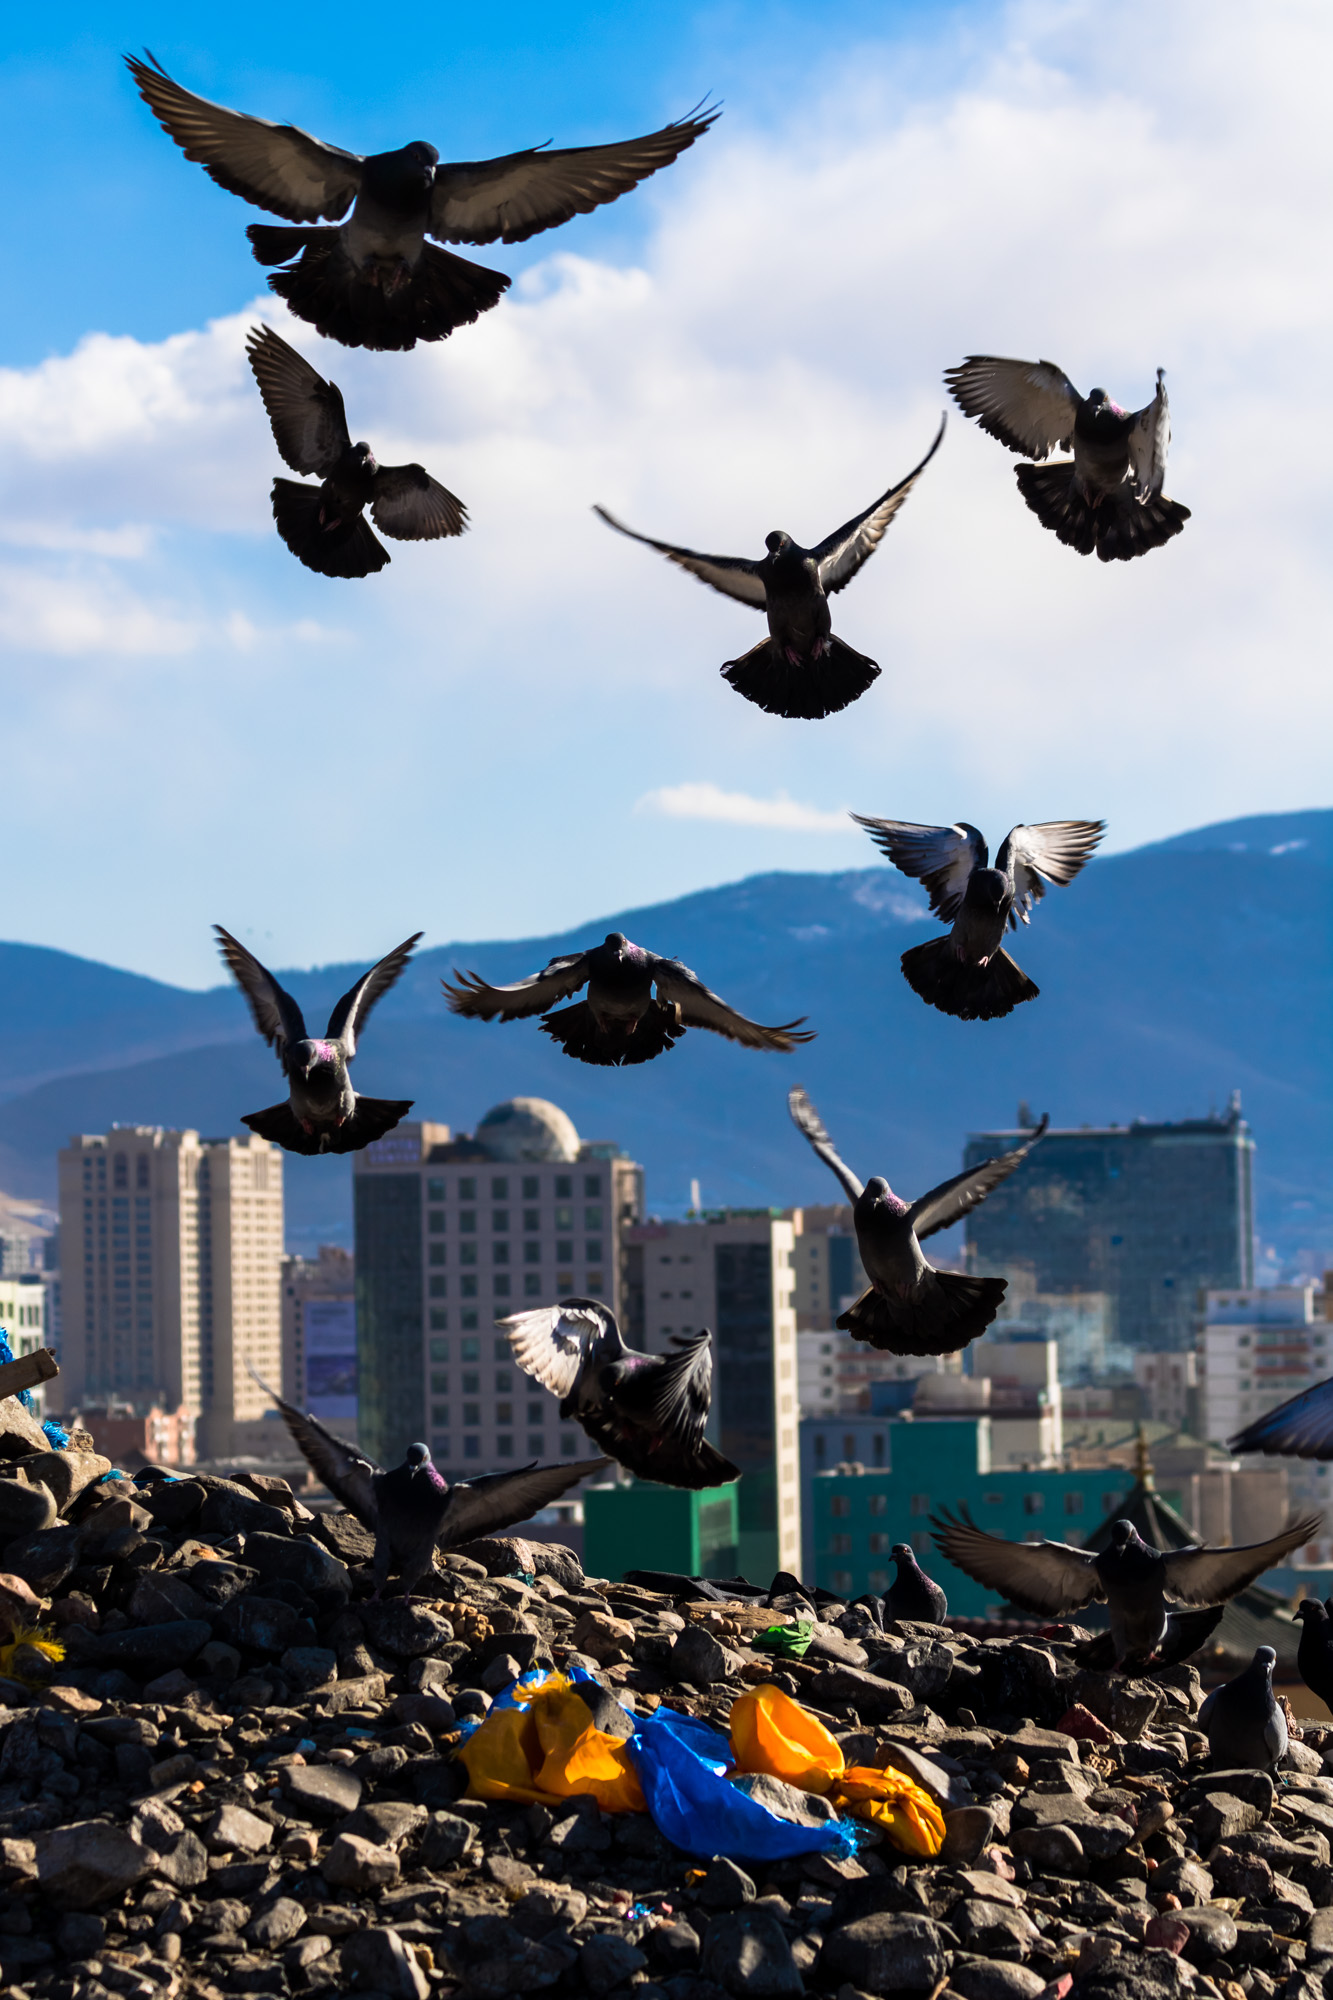 A flight of pigeons burst into the sky after eating traditional offerings left on an ovoo, a Tengriist rock shrine. In such a developed capital, ovoo hilltop mounds remain some of the only open spaces not yet built over with apartment complexes or office towers.